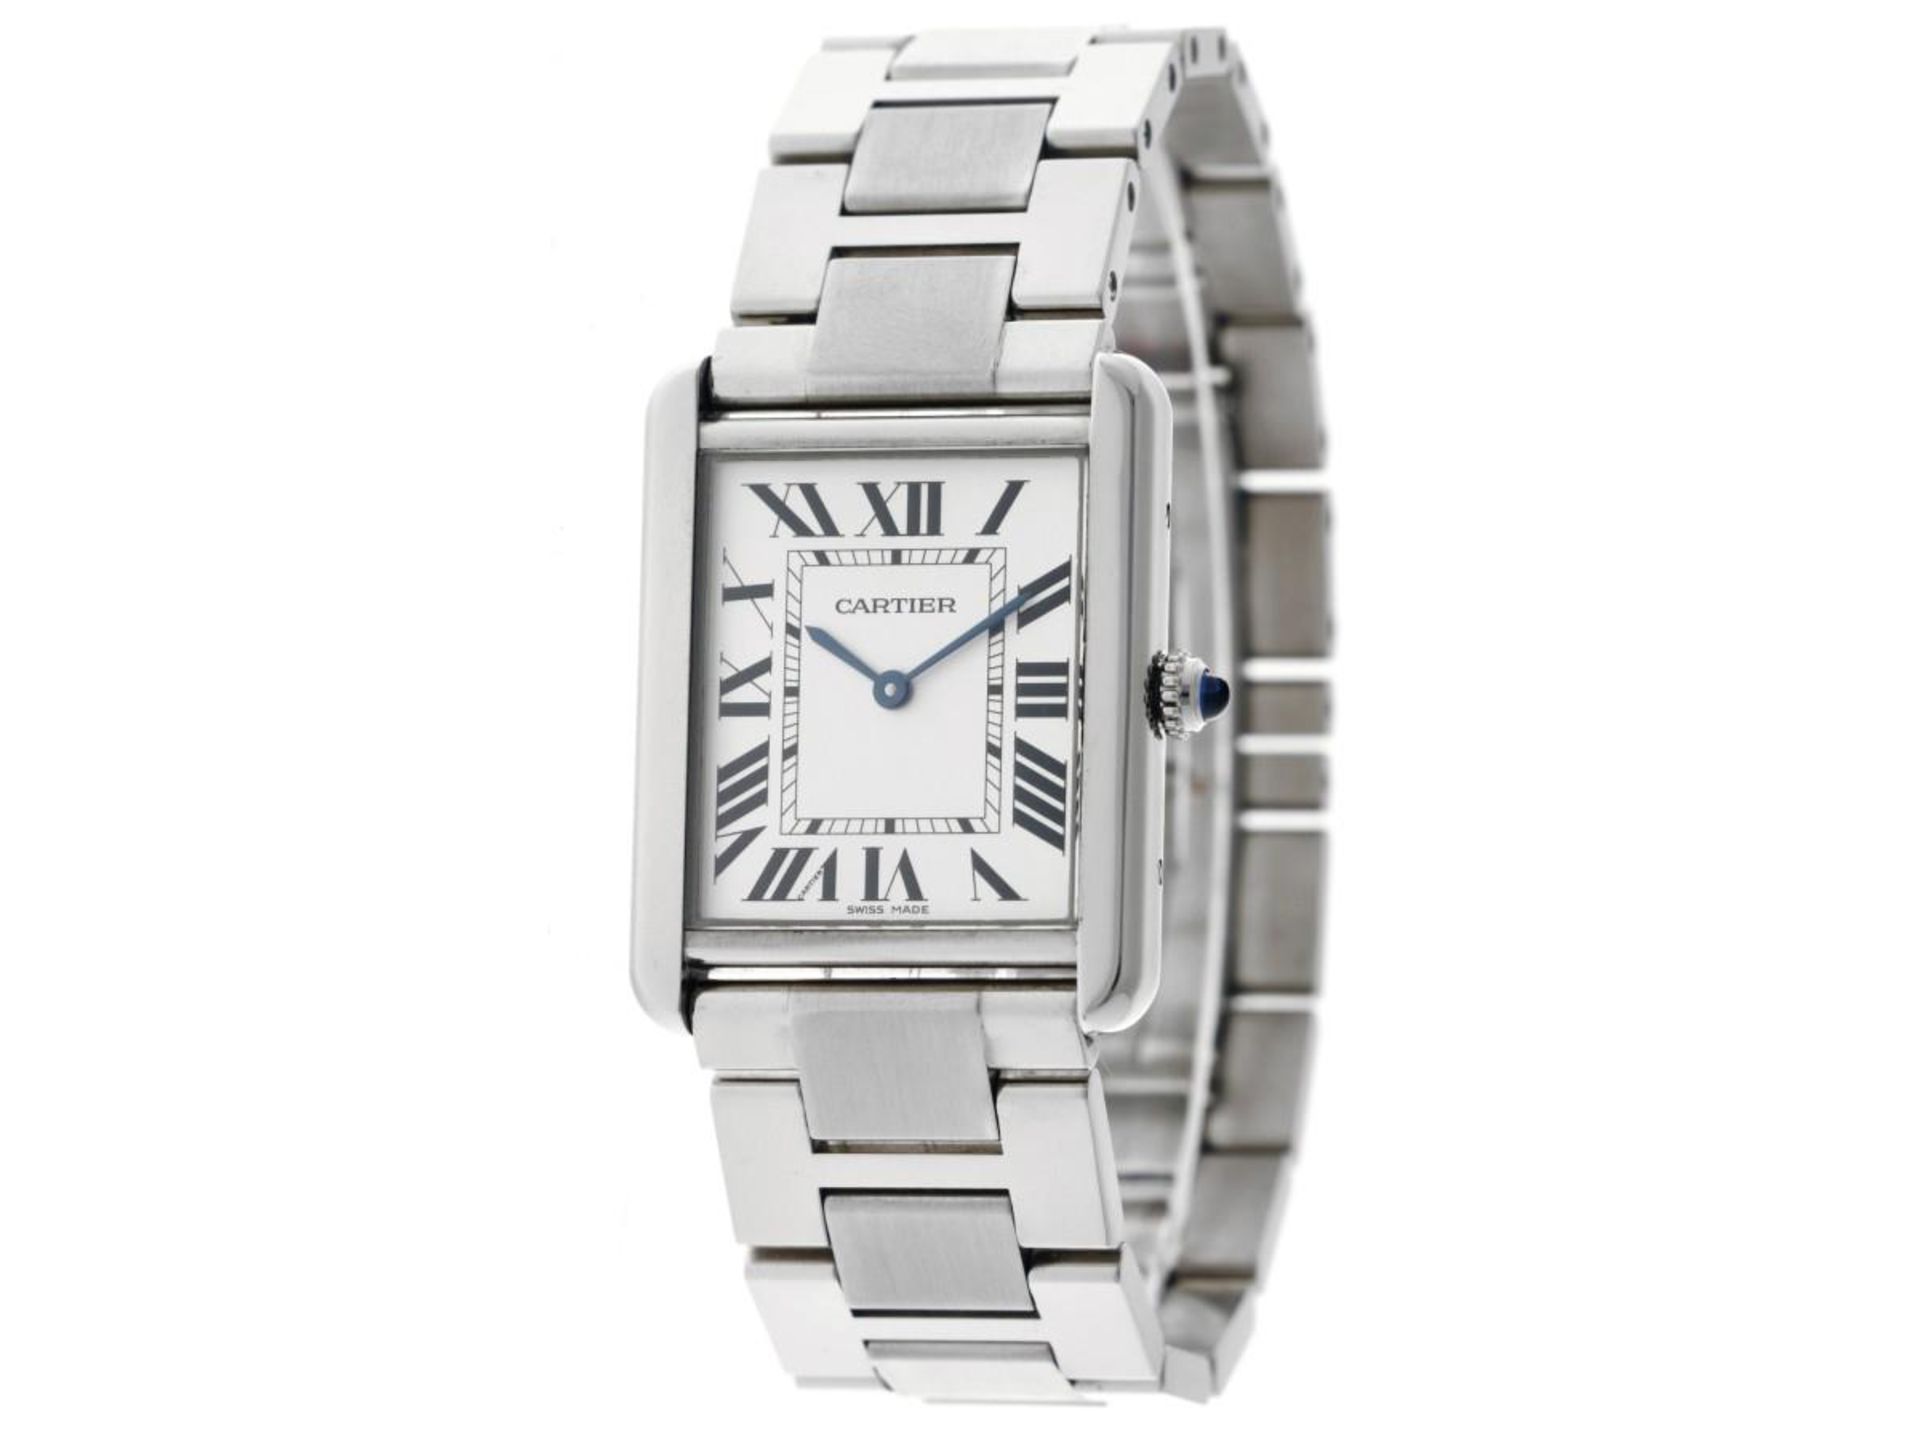 Cartier Tank Solo 3169 - Men's watch - approx. 2015. - Image 4 of 12